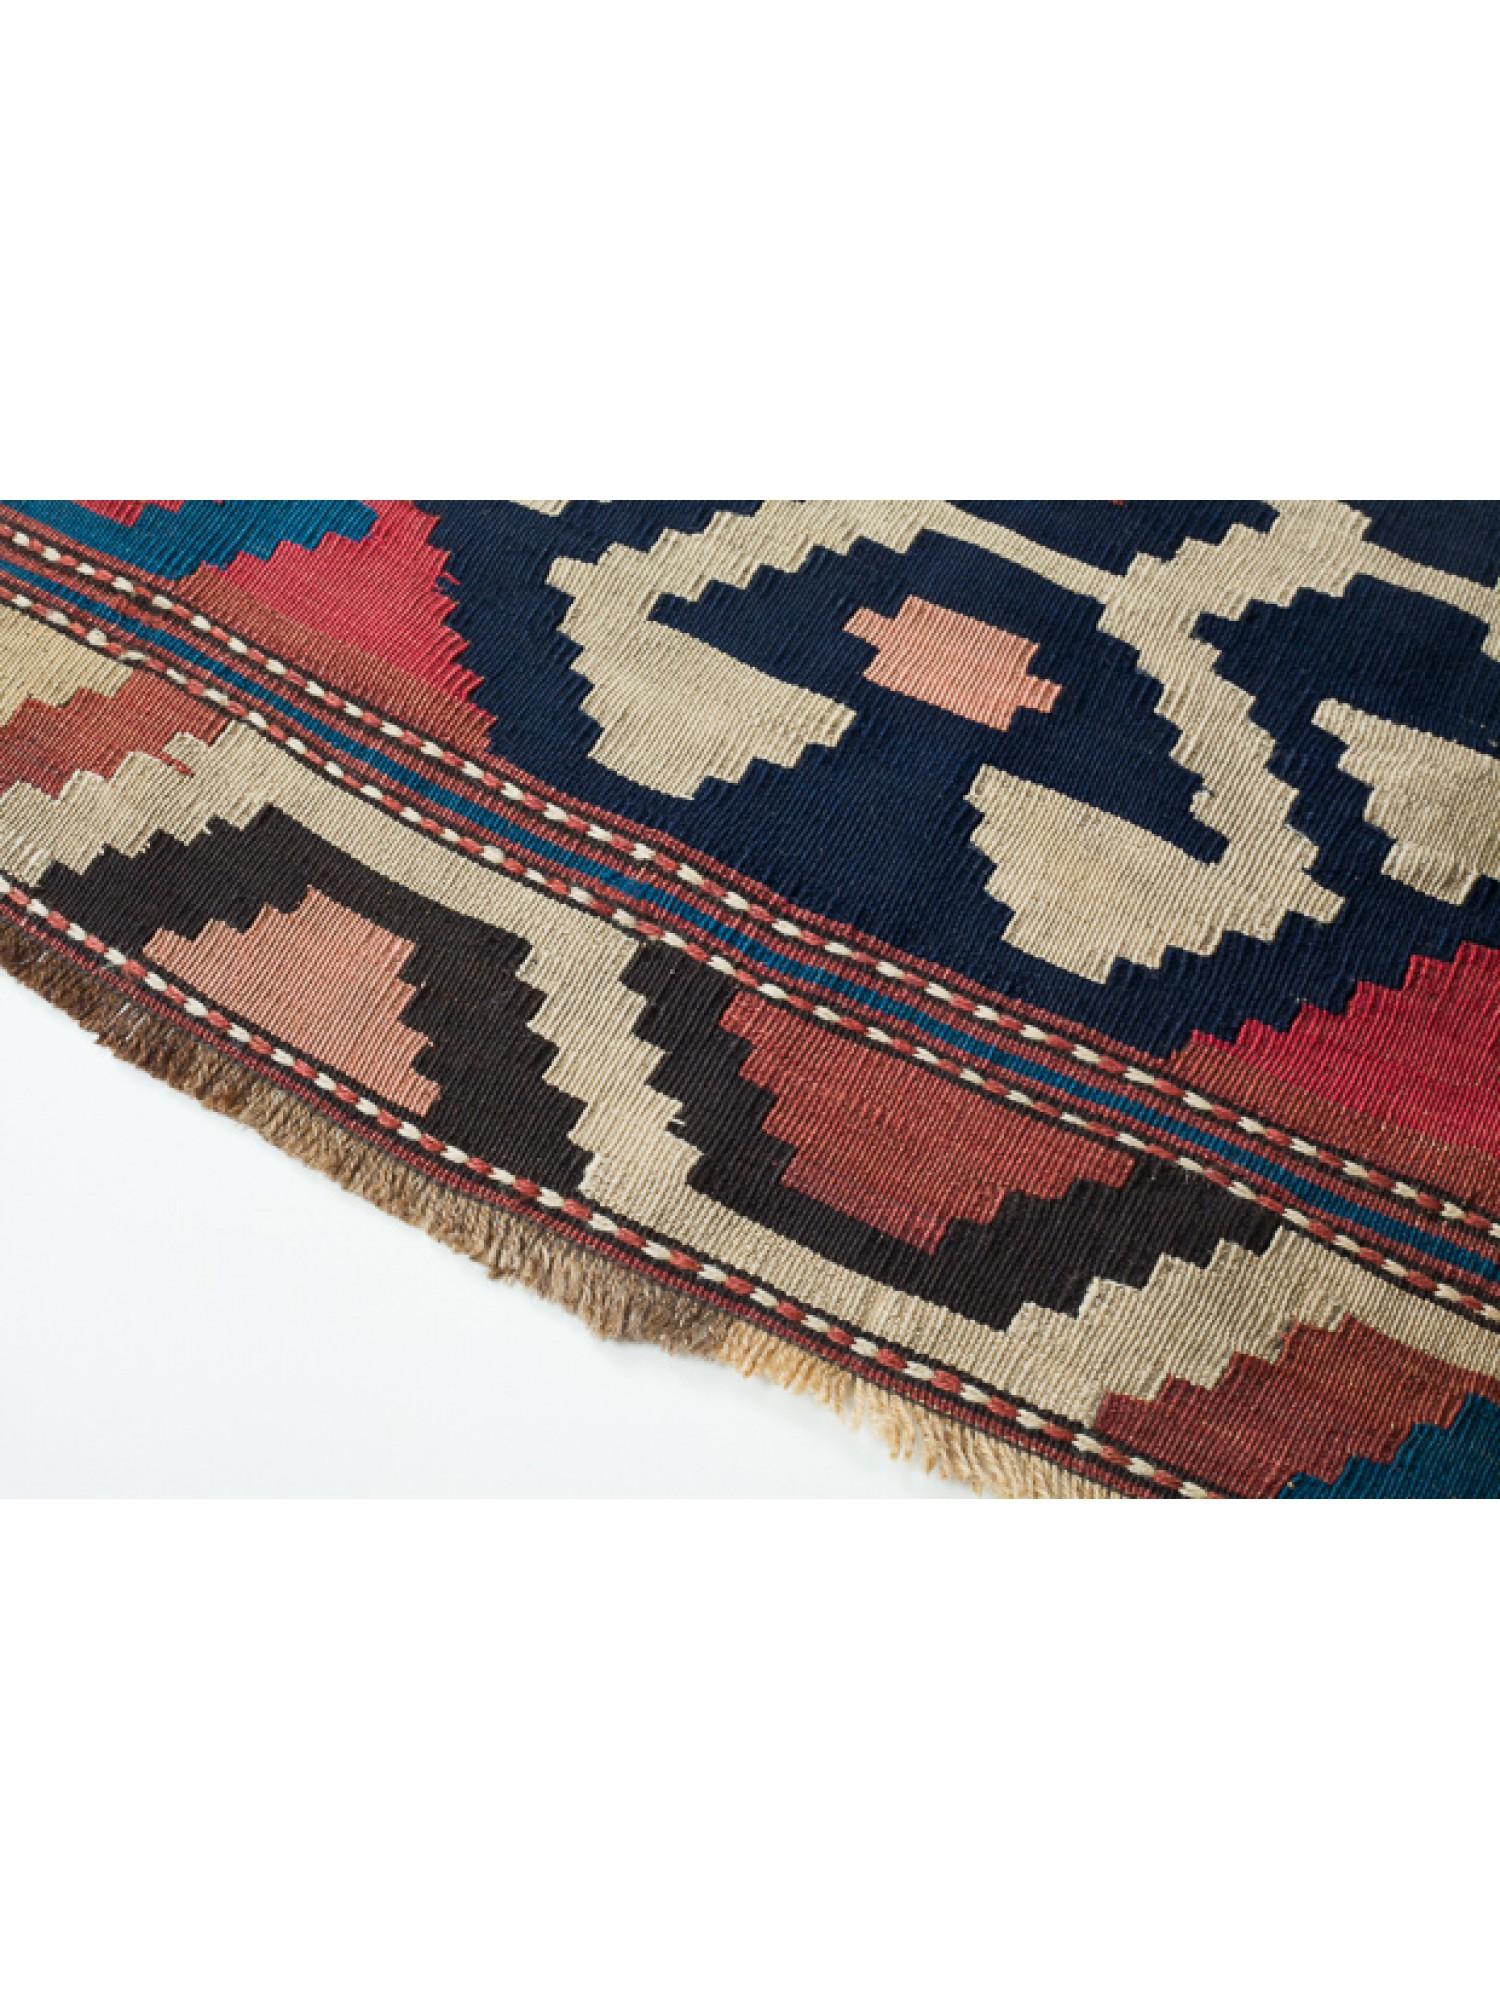 Wool Antique Early 20th Century Caucasian Kilim Woven Cradle Part, Natural Dyed For Sale